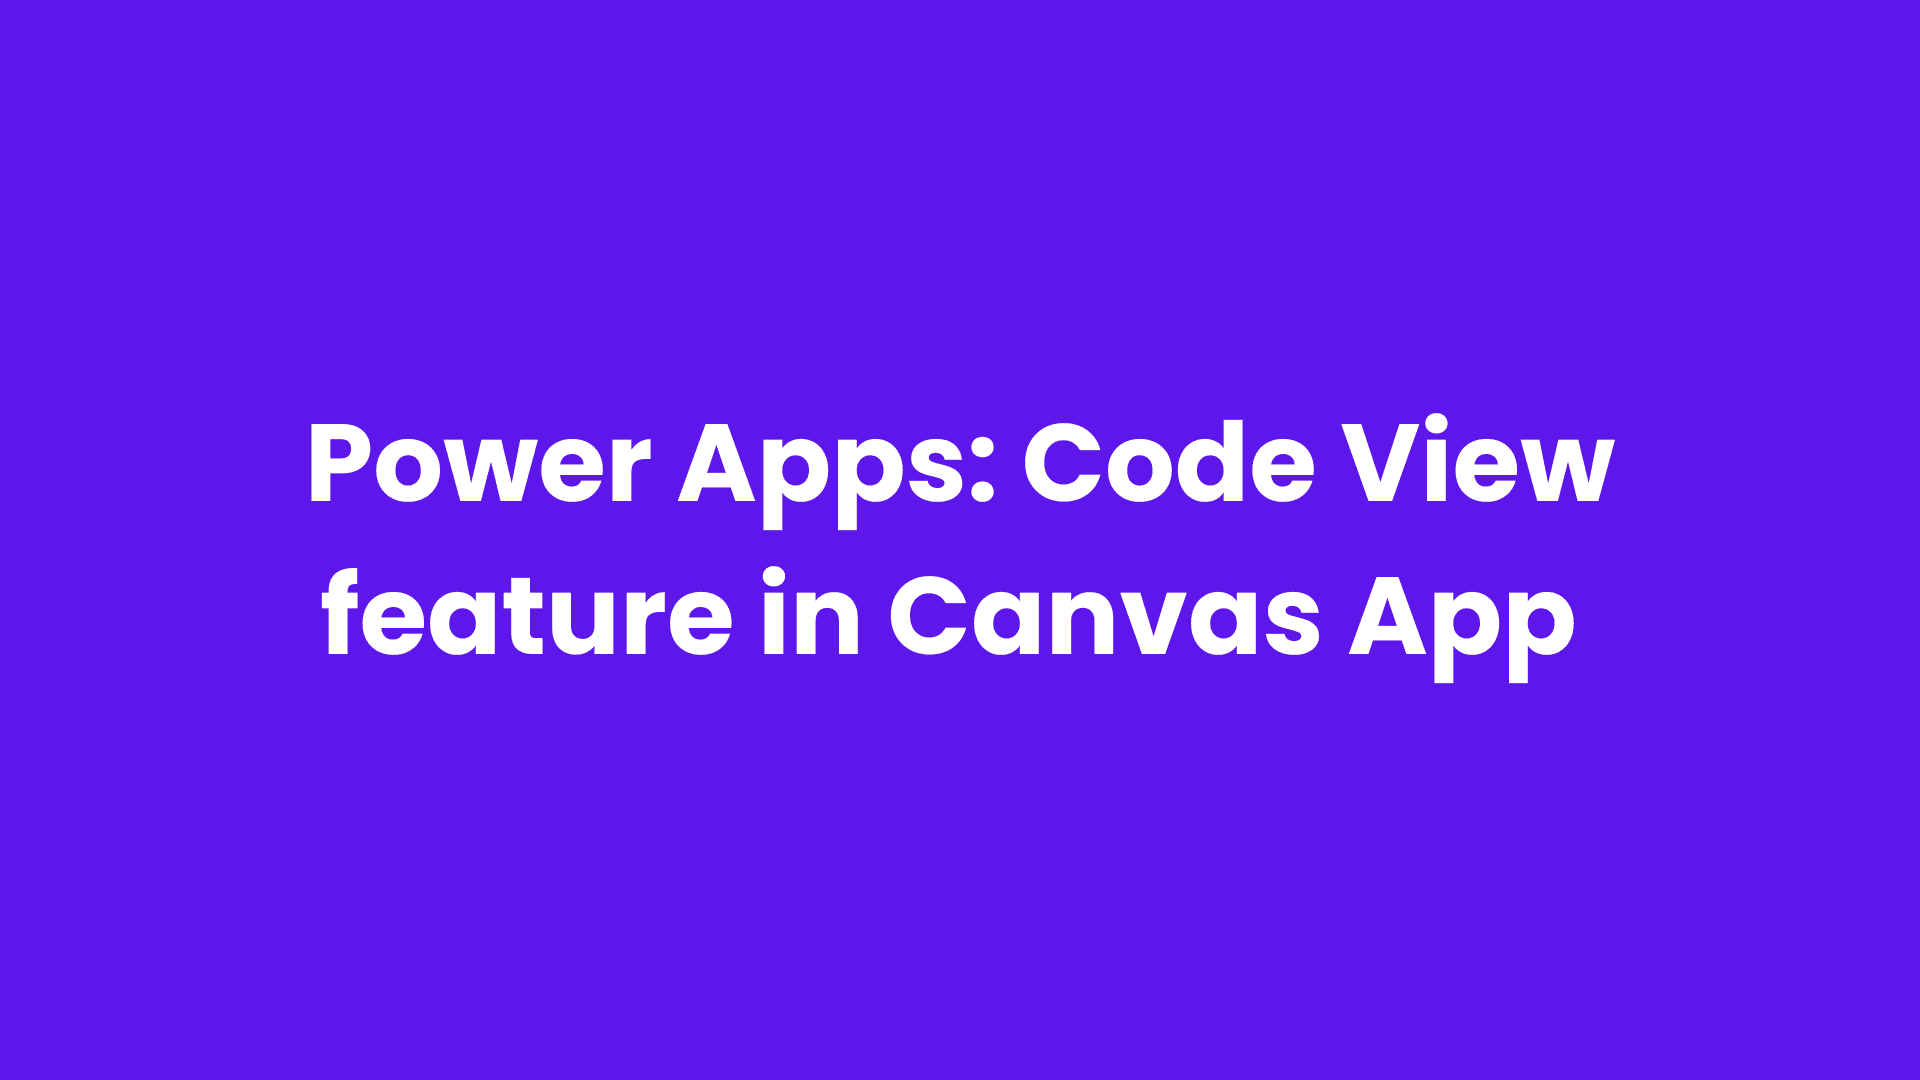 Power Apps: Code View feature in Canvas App 